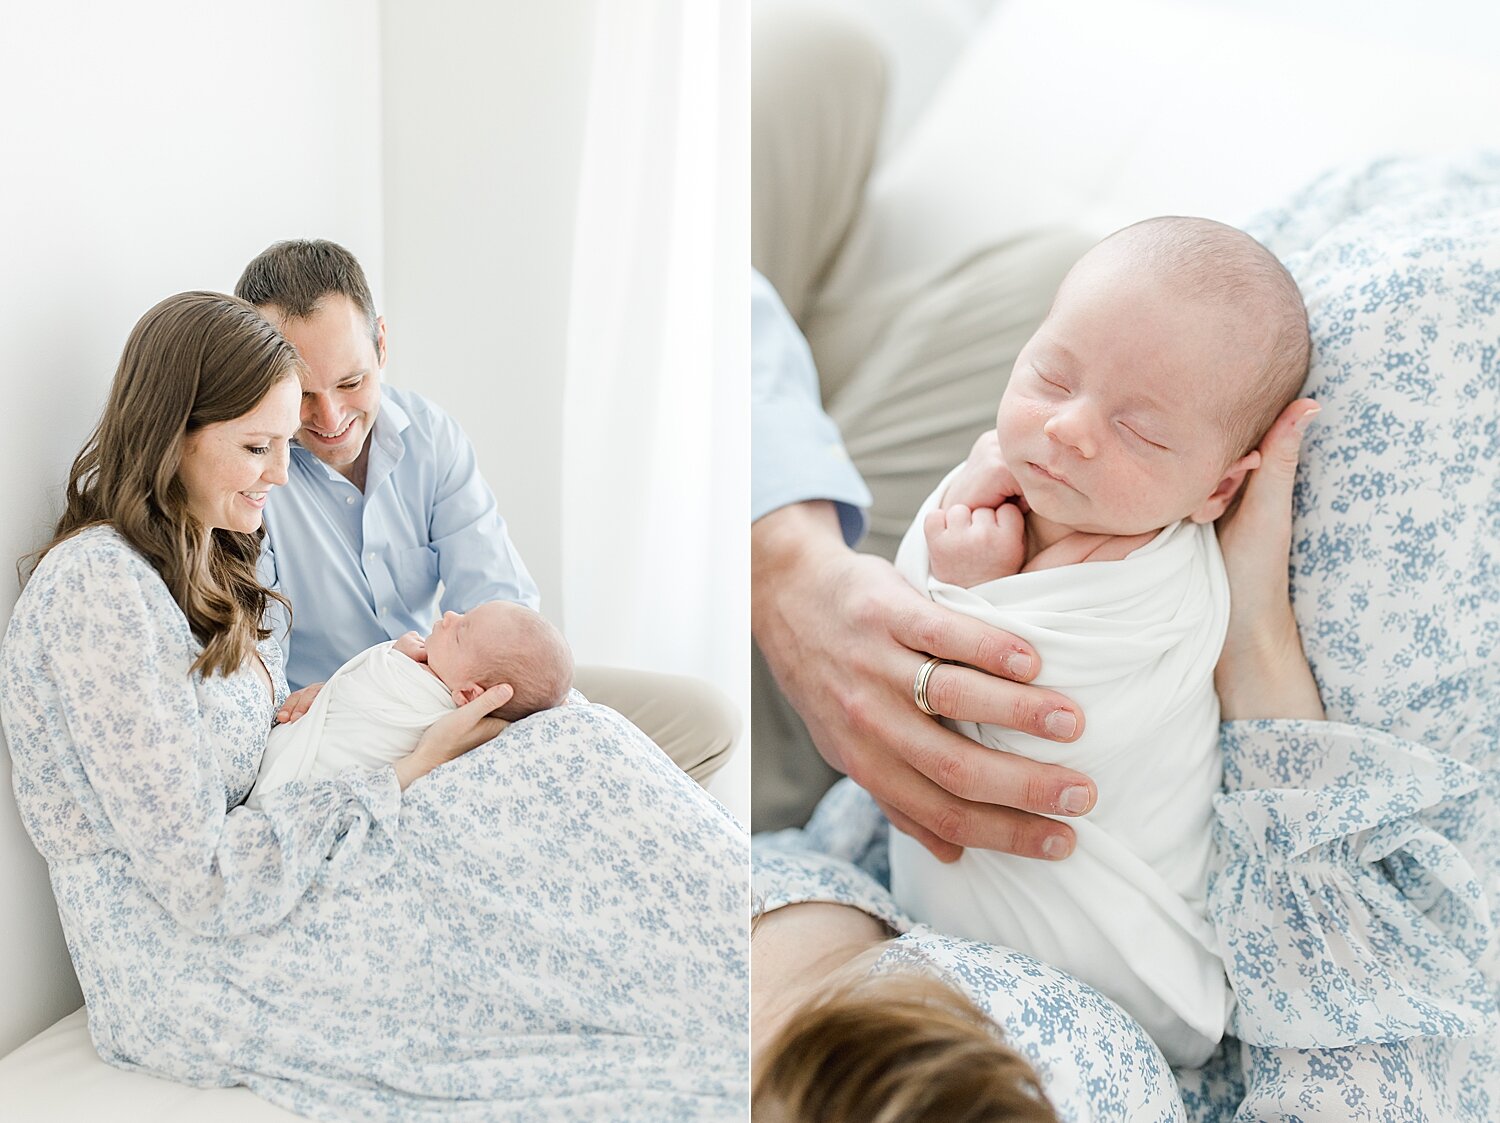 Newborn session in studio with first-time parents and baby boy. Photo by Kristin Wood Photography.